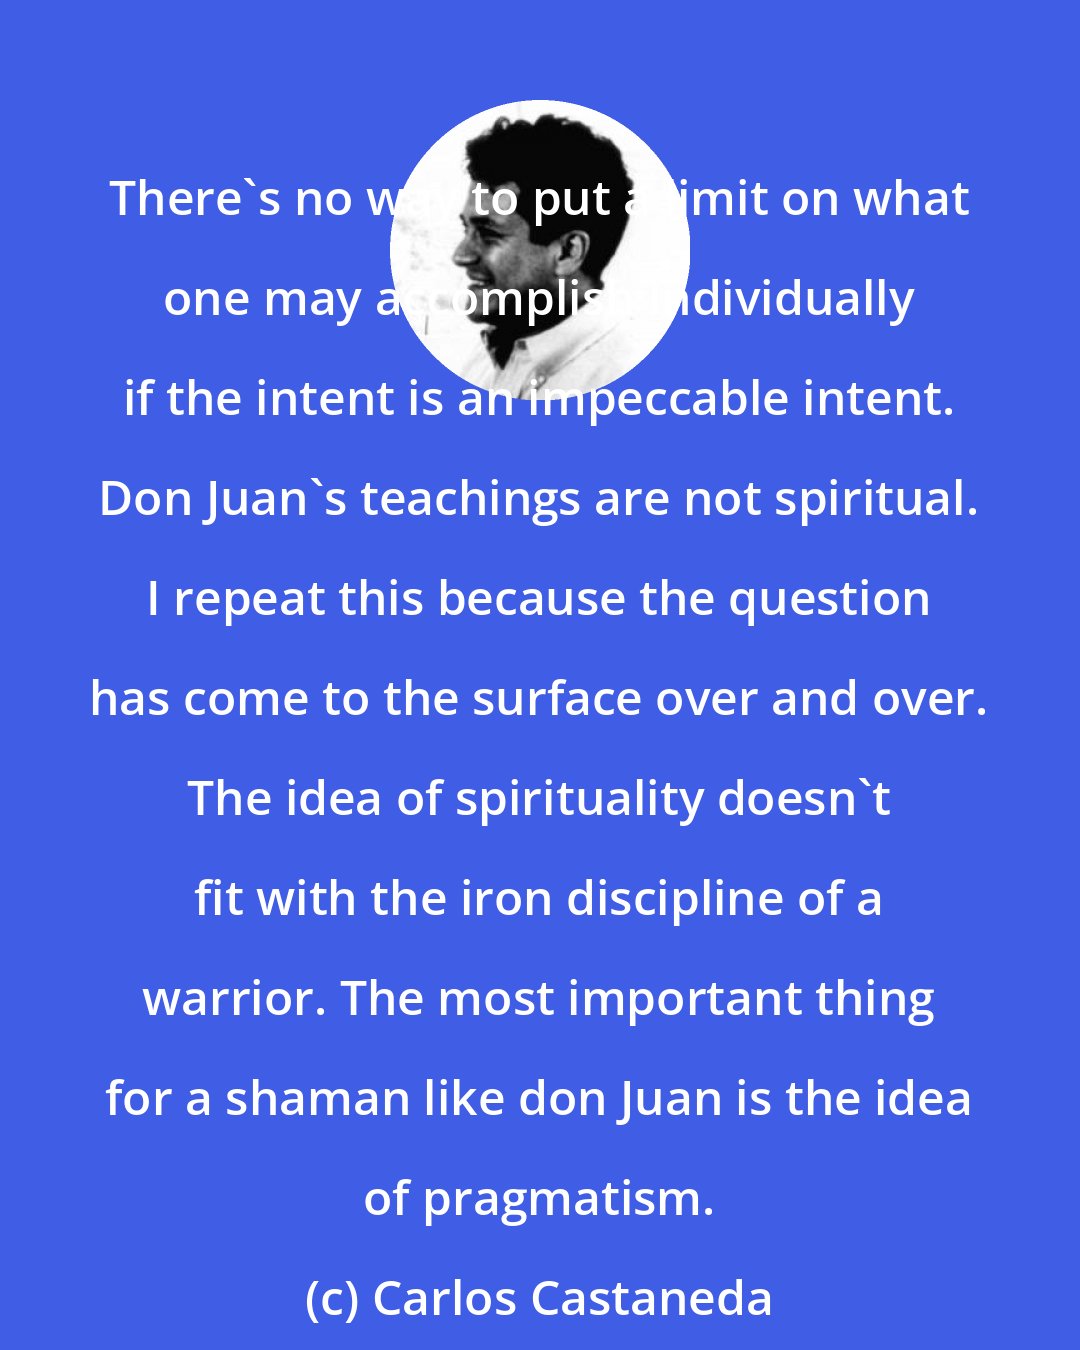 Carlos Castaneda: There's no way to put a limit on what one may accomplish individually if the intent is an impeccable intent. Don Juan's teachings are not spiritual. I repeat this because the question has come to the surface over and over. The idea of spirituality doesn't fit with the iron discipline of a warrior. The most important thing for a shaman like don Juan is the idea of pragmatism.